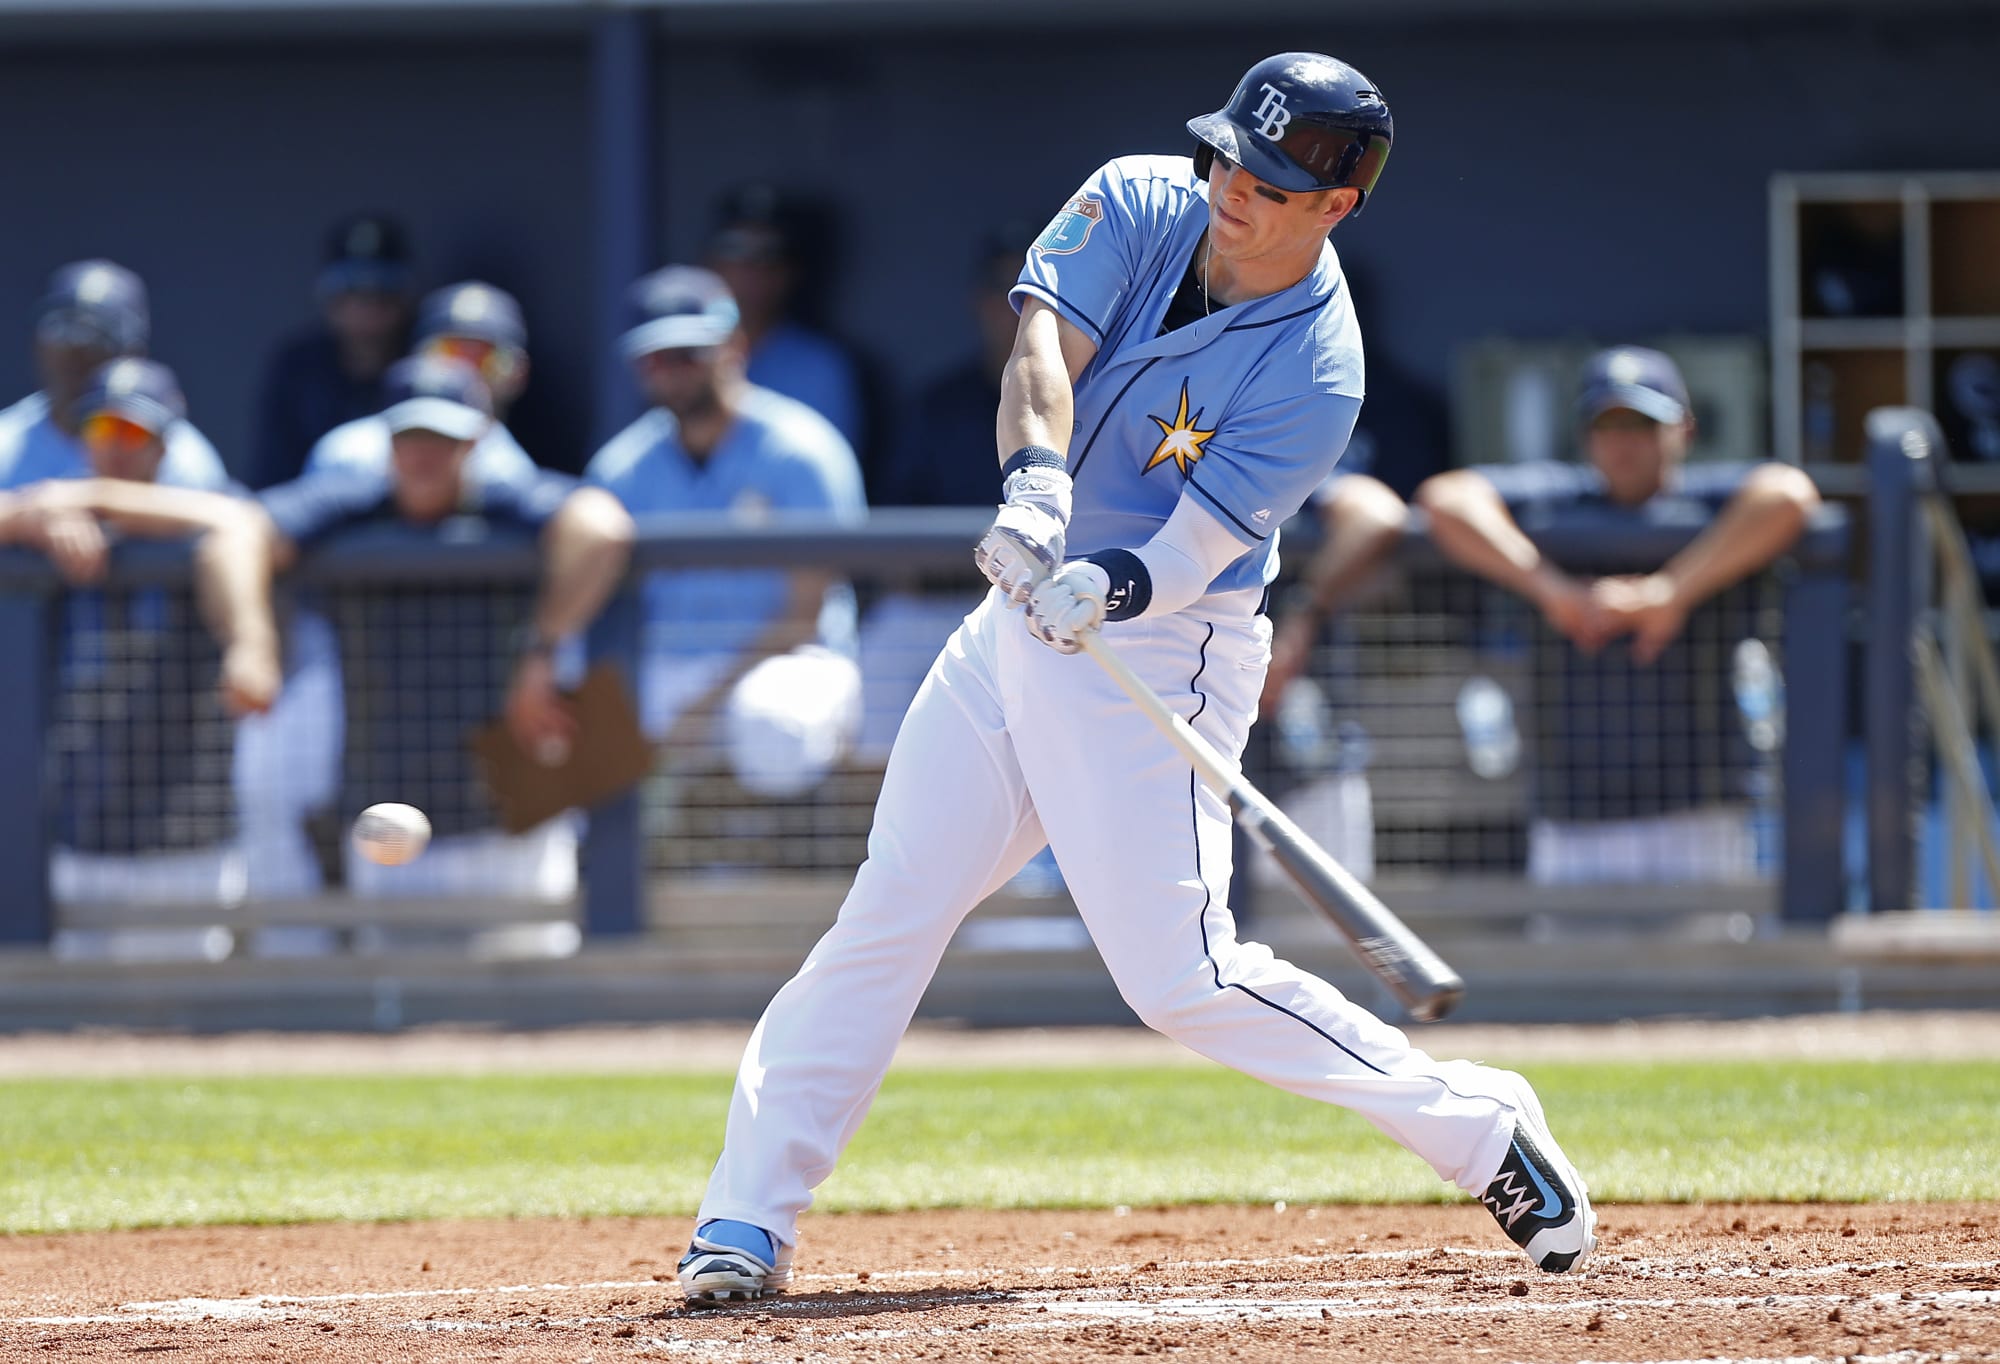 Tampa Bay Rays hold off Toronto Blue Jays behind Corey Dickerson